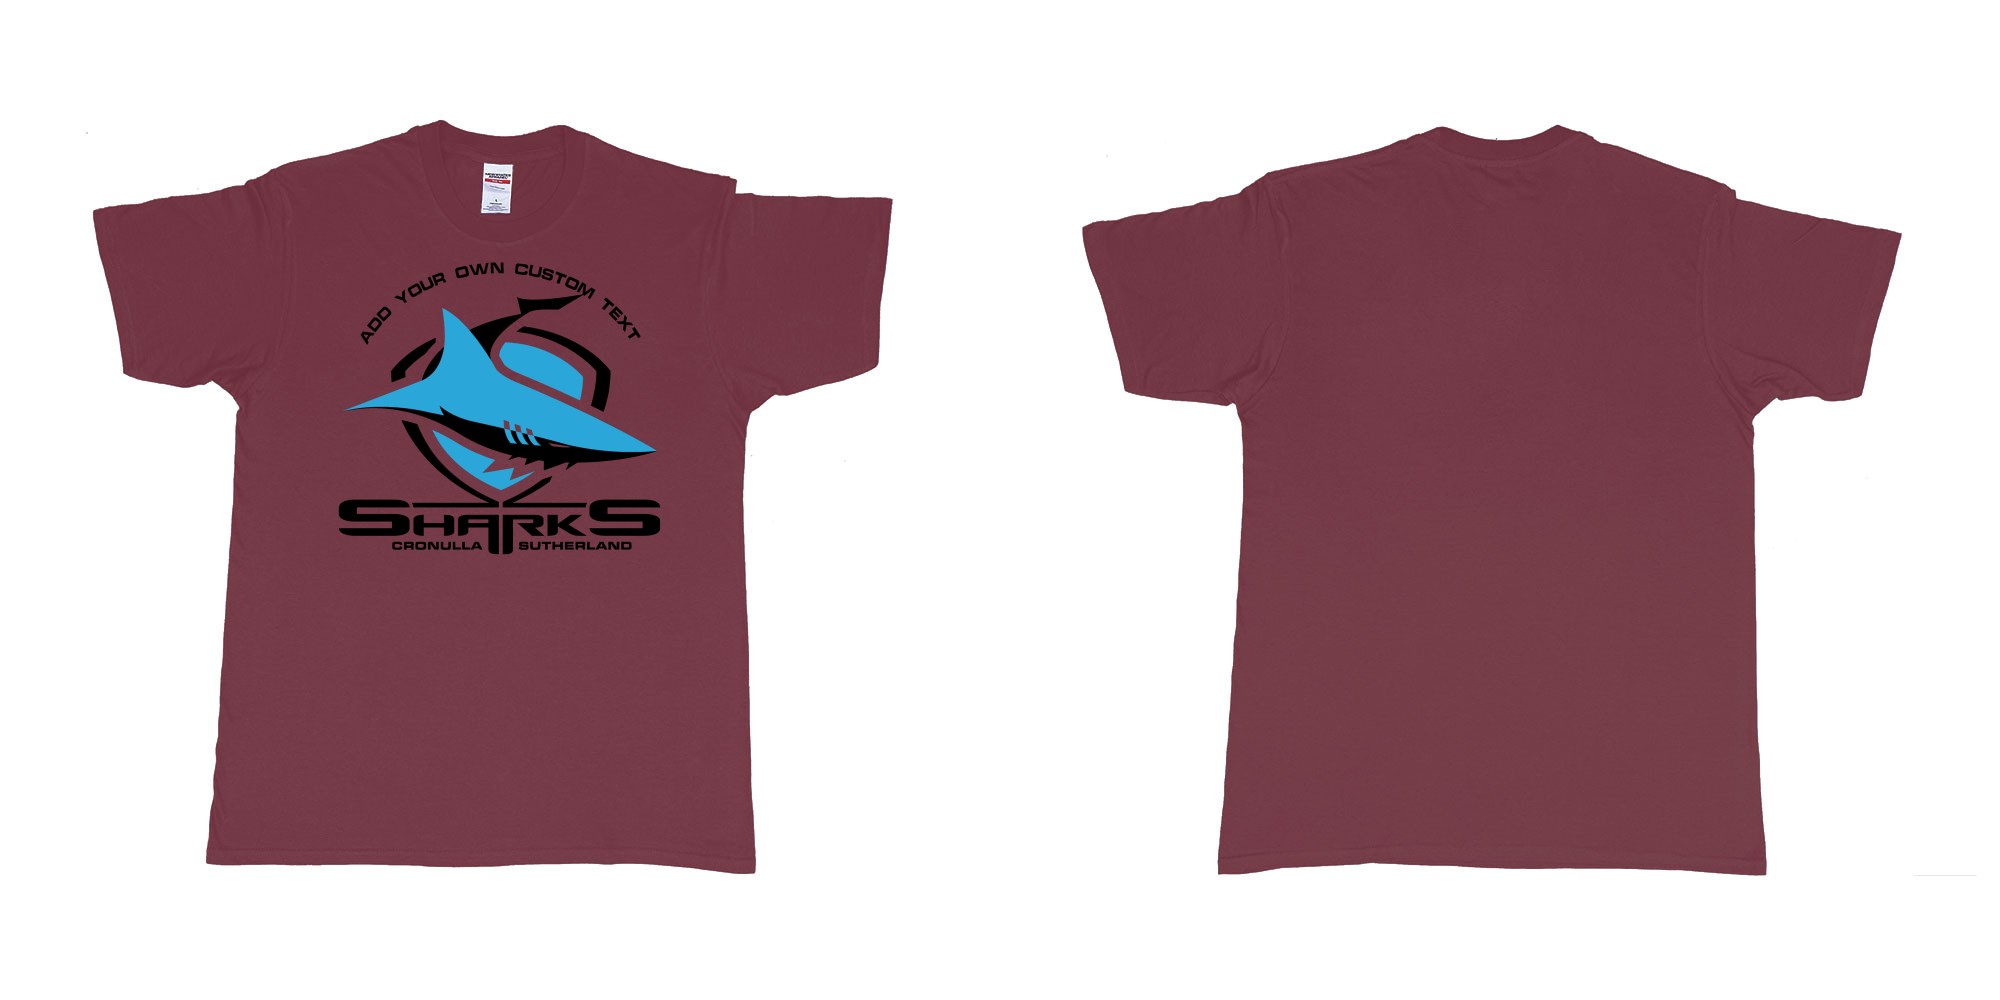 Custom tshirt design sharks cronulla sutherland shire southern sydney new south wales in fabric color marron choice your own text made in Bali by The Pirate Way